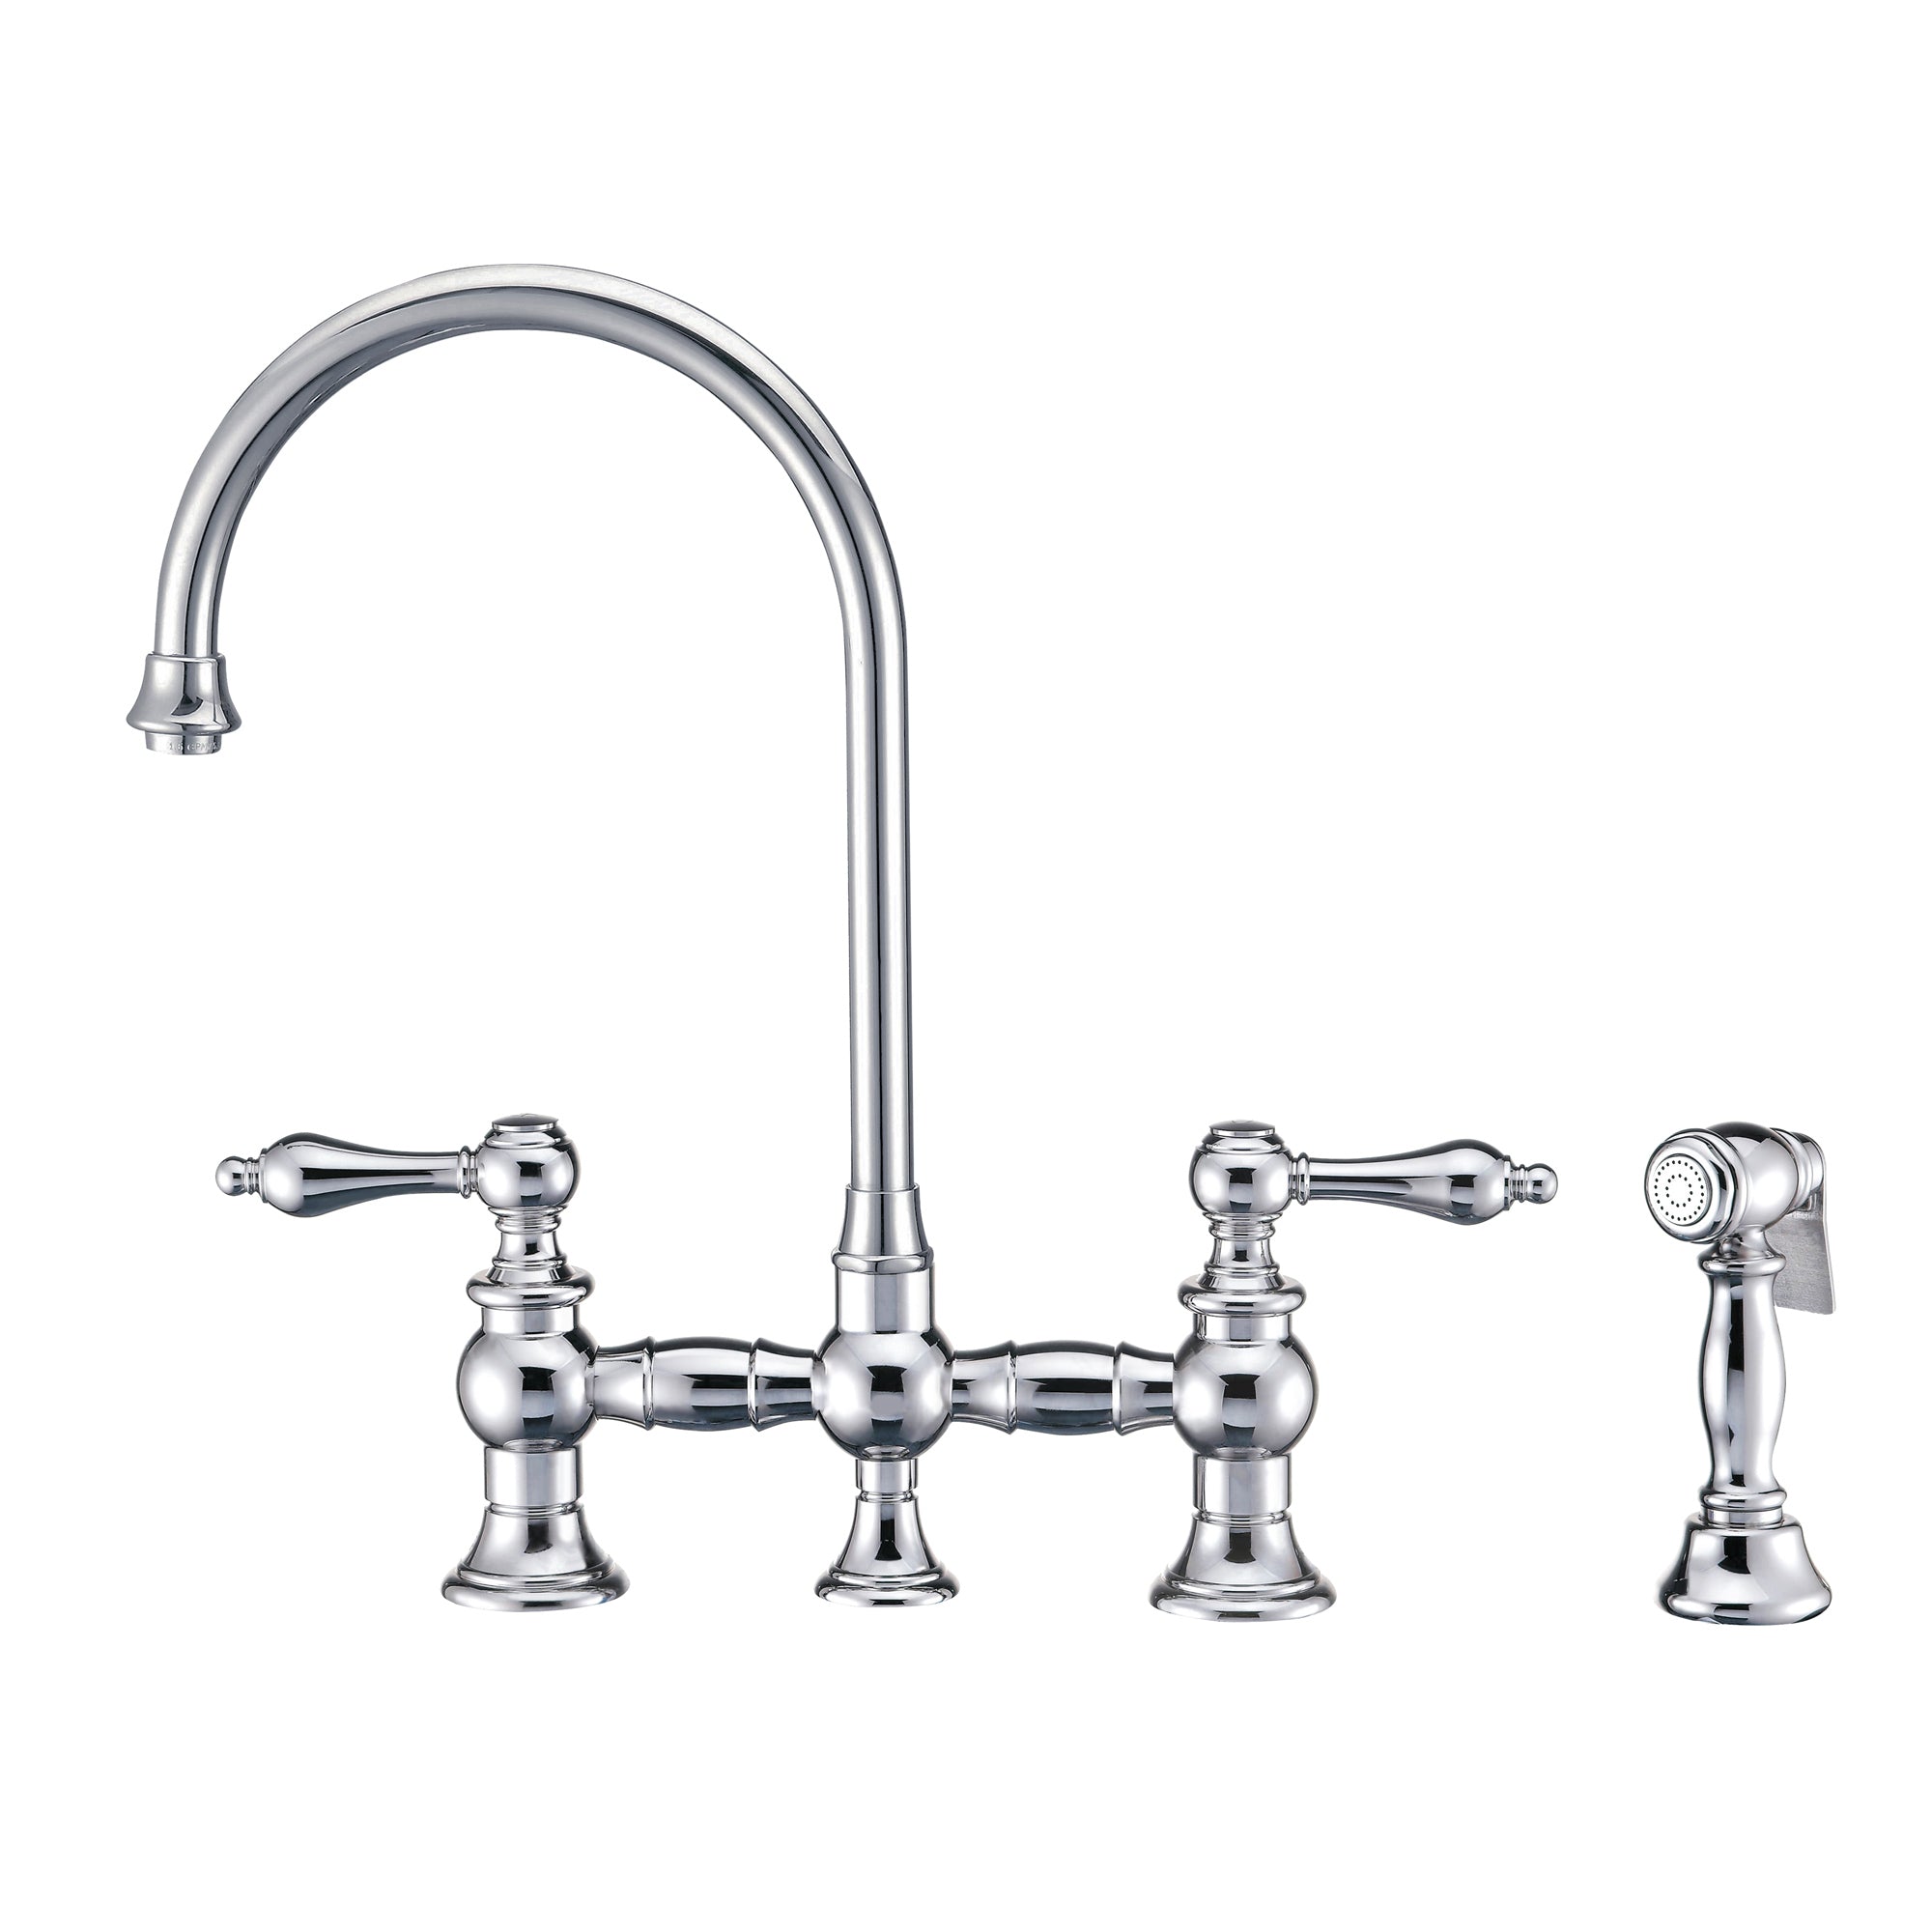 Vintage III Plus Bridge Faucet with Long Gooseneck Swivel Spout, Lever Handles and Solid Brass Side Spray